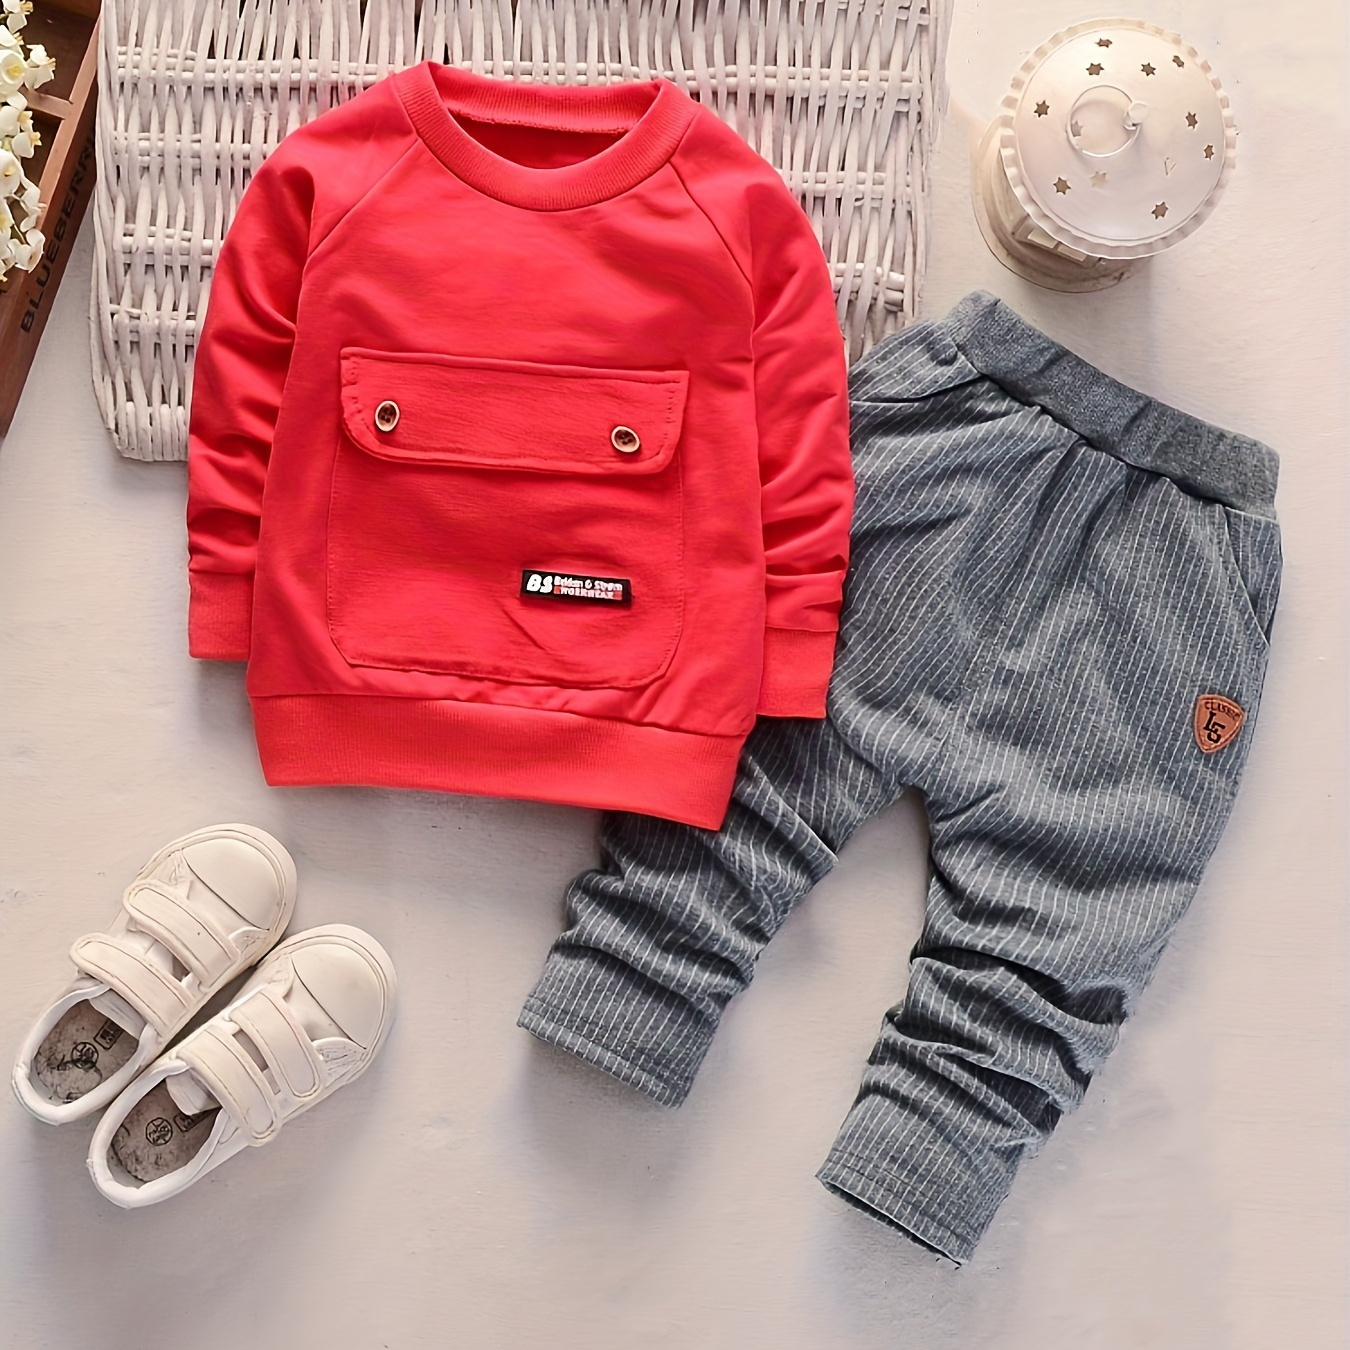 

Kid's Classic Casual Outfits - 2pcs Slant Shoulder Long Sleeve Top With Big Pocket Design + Trousers Set For Spring Autumn